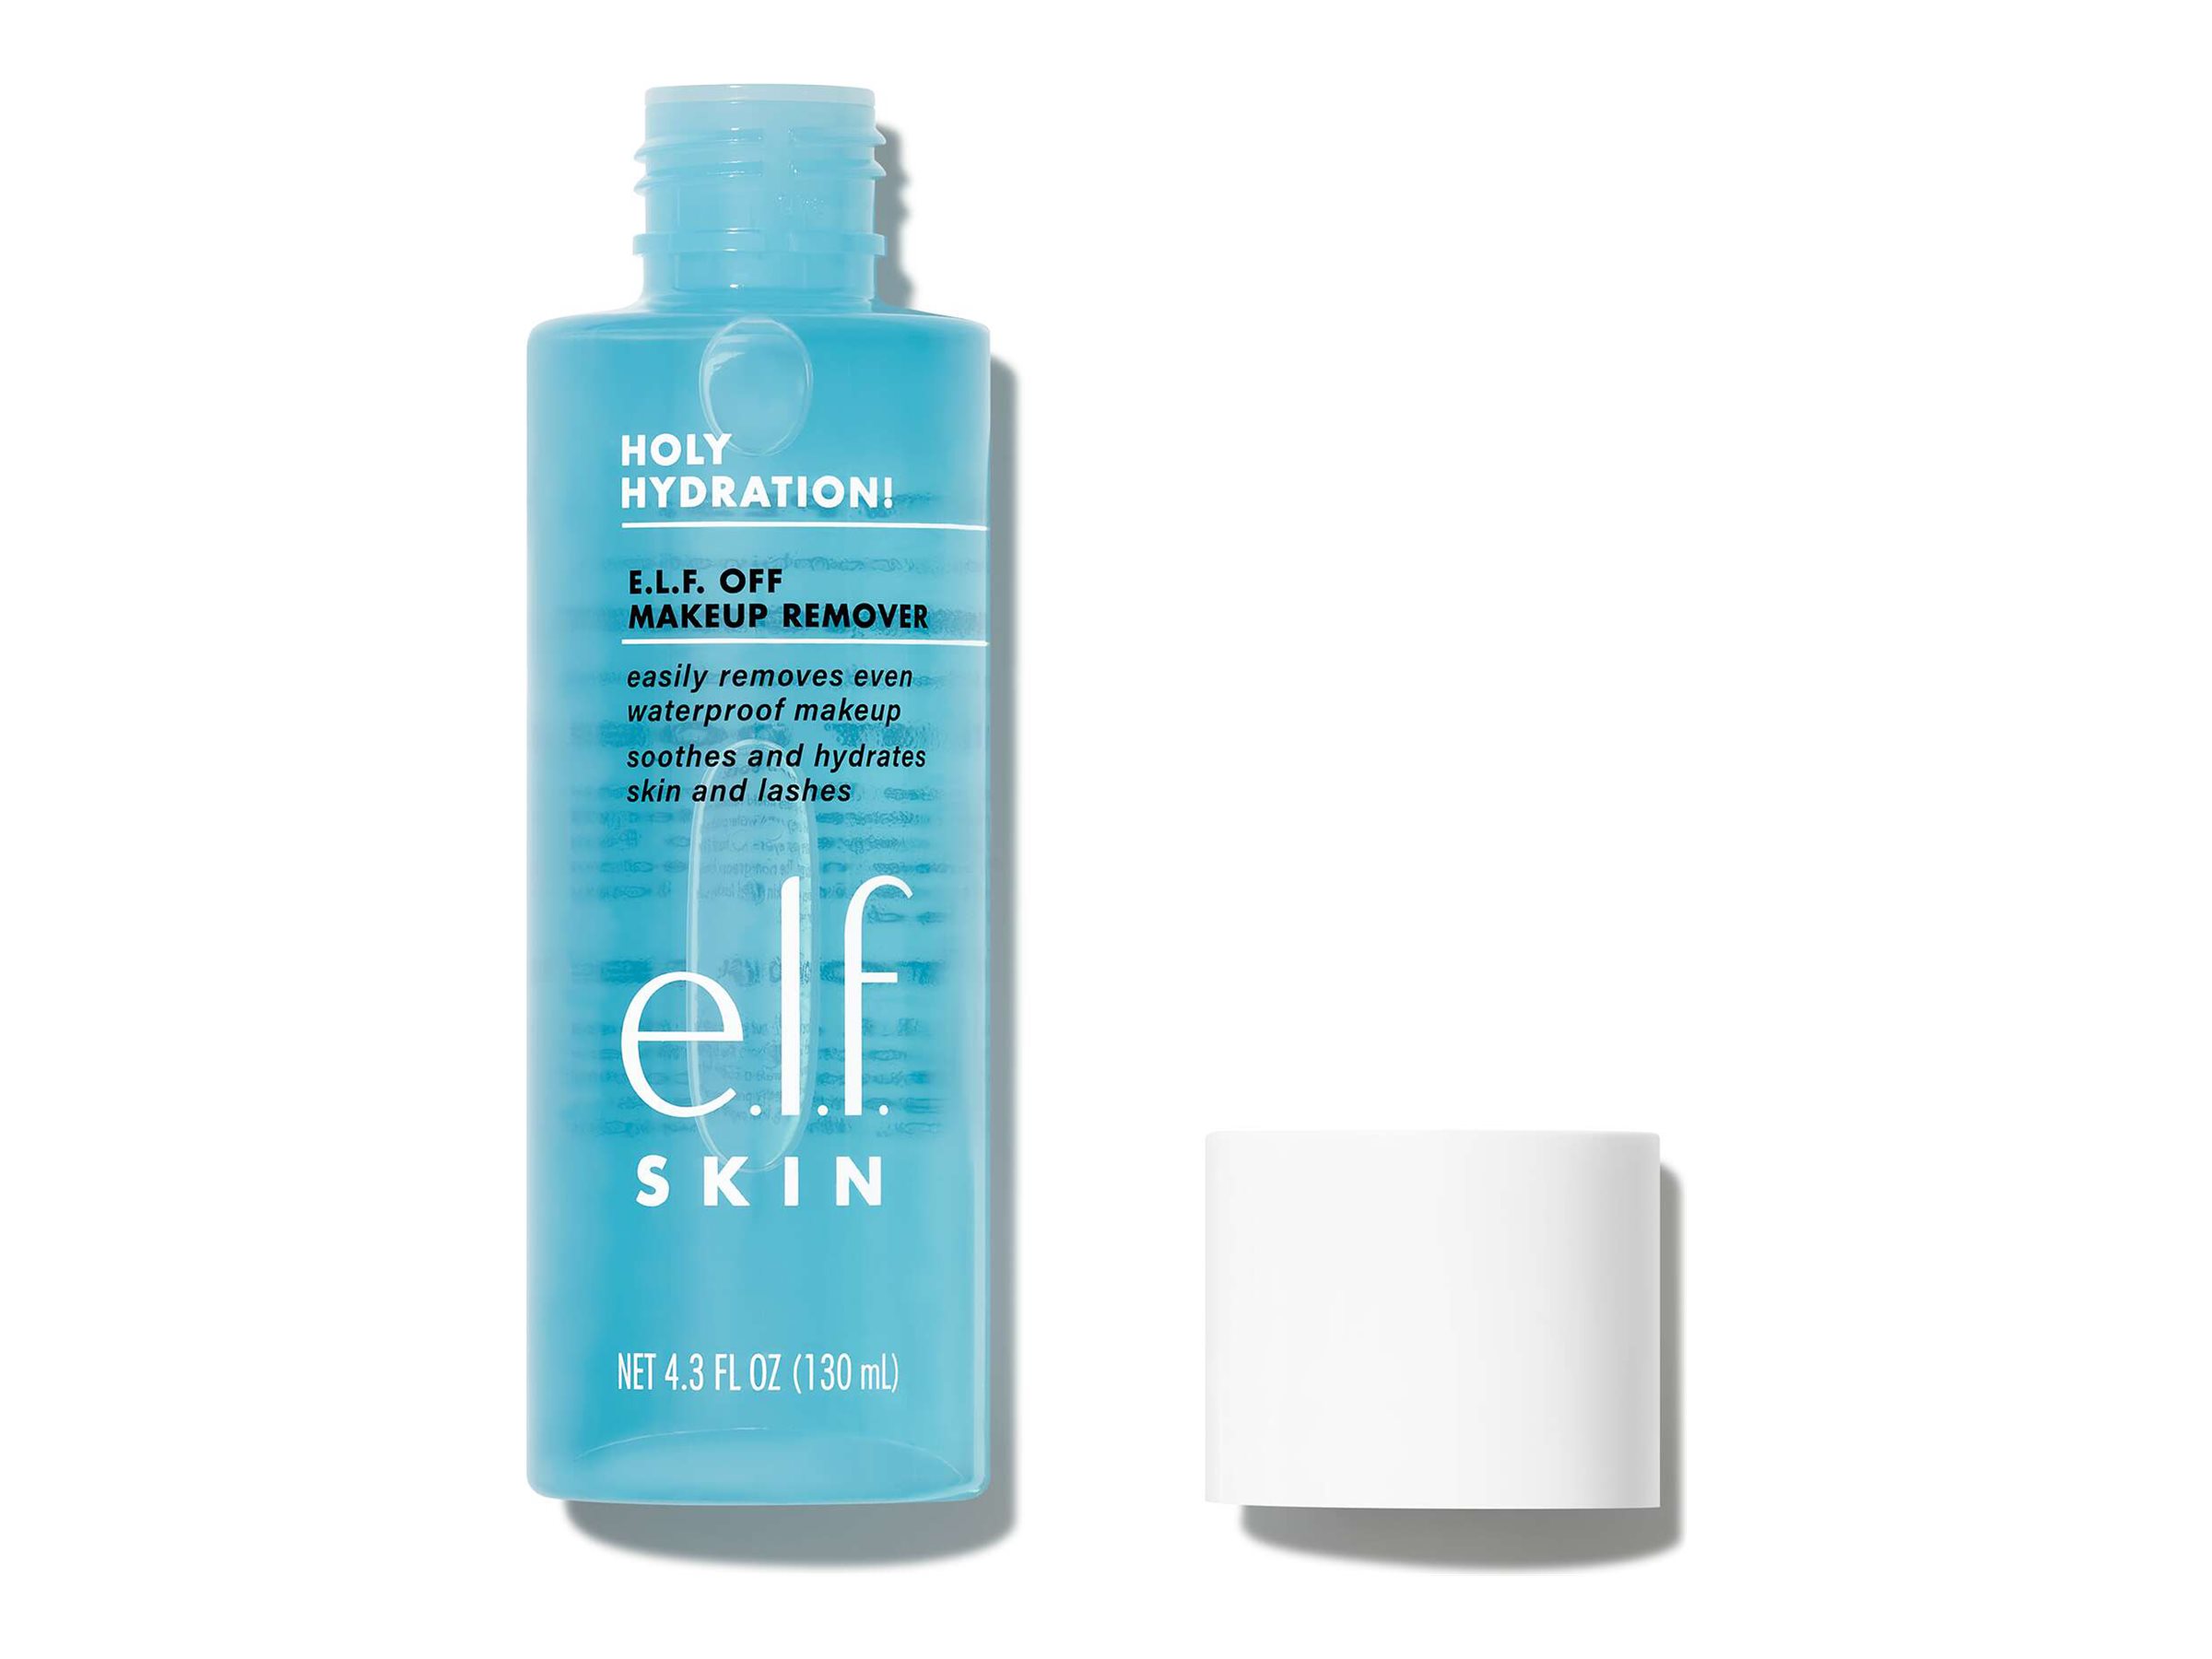 e.l.f. Holy Hydration! Off Makeup Remover - 130ml